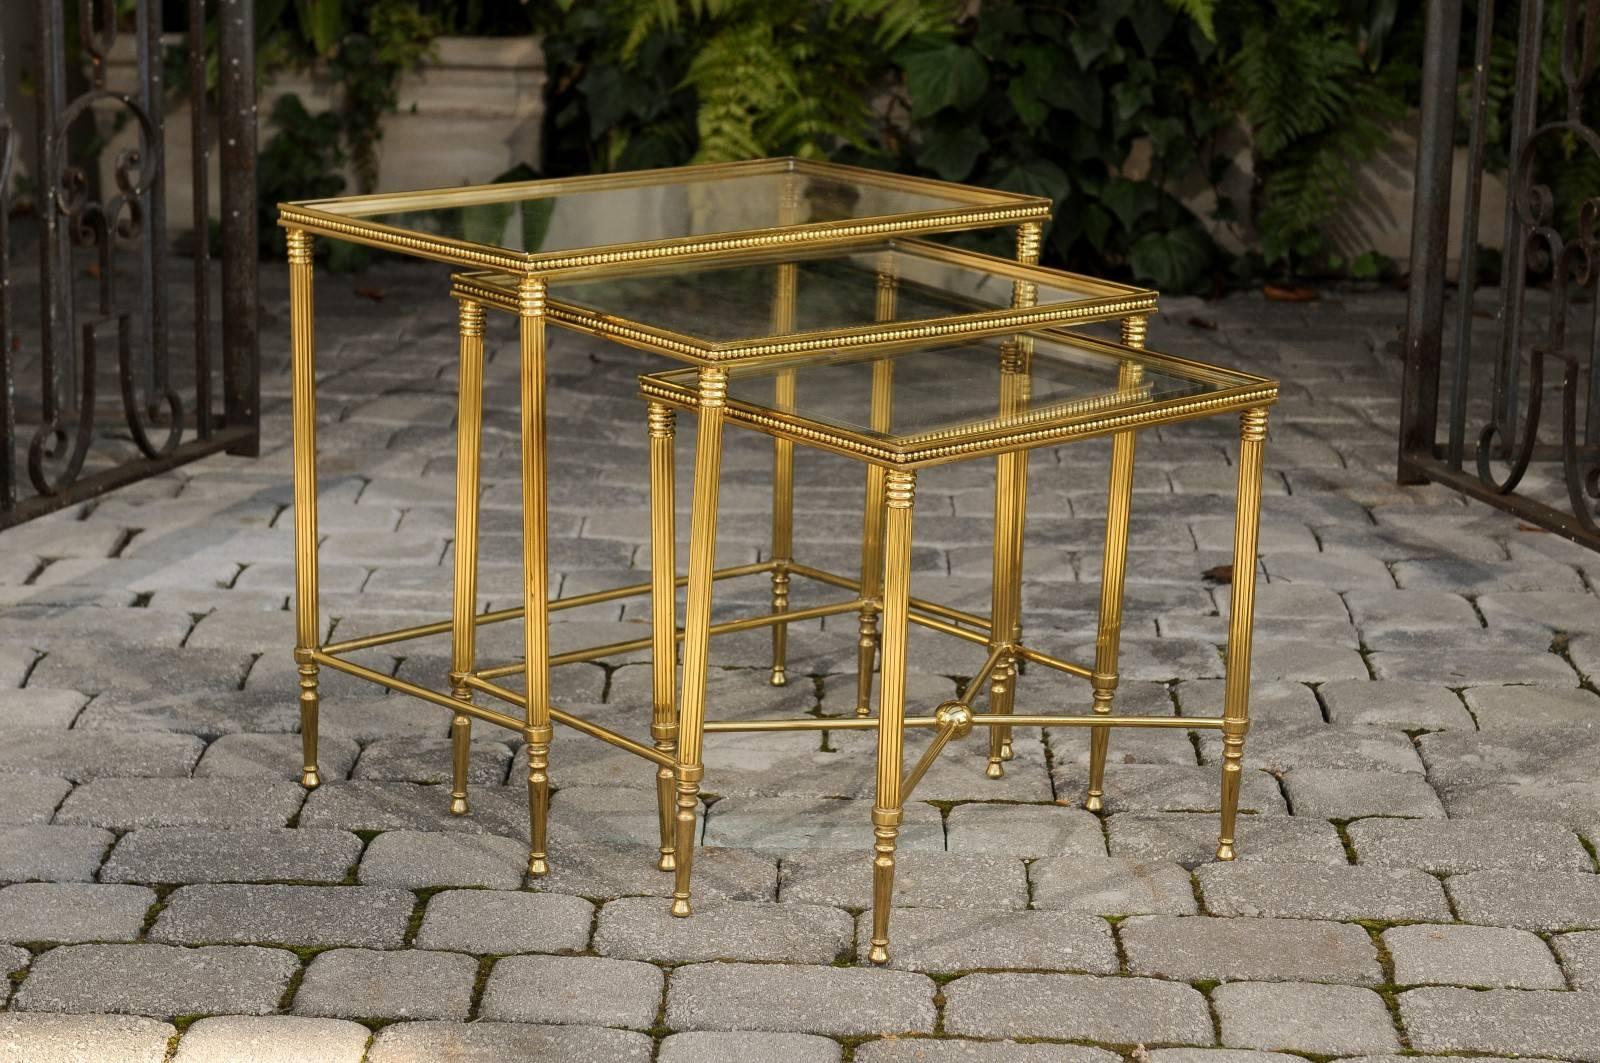 A set of three French nesting tables with glass tops and brass armature from the mid-20th century. Each of this charming set of French vintage nesting tables features a 1.75 thick glass top adorned in its surround with a mirrored frame and supported